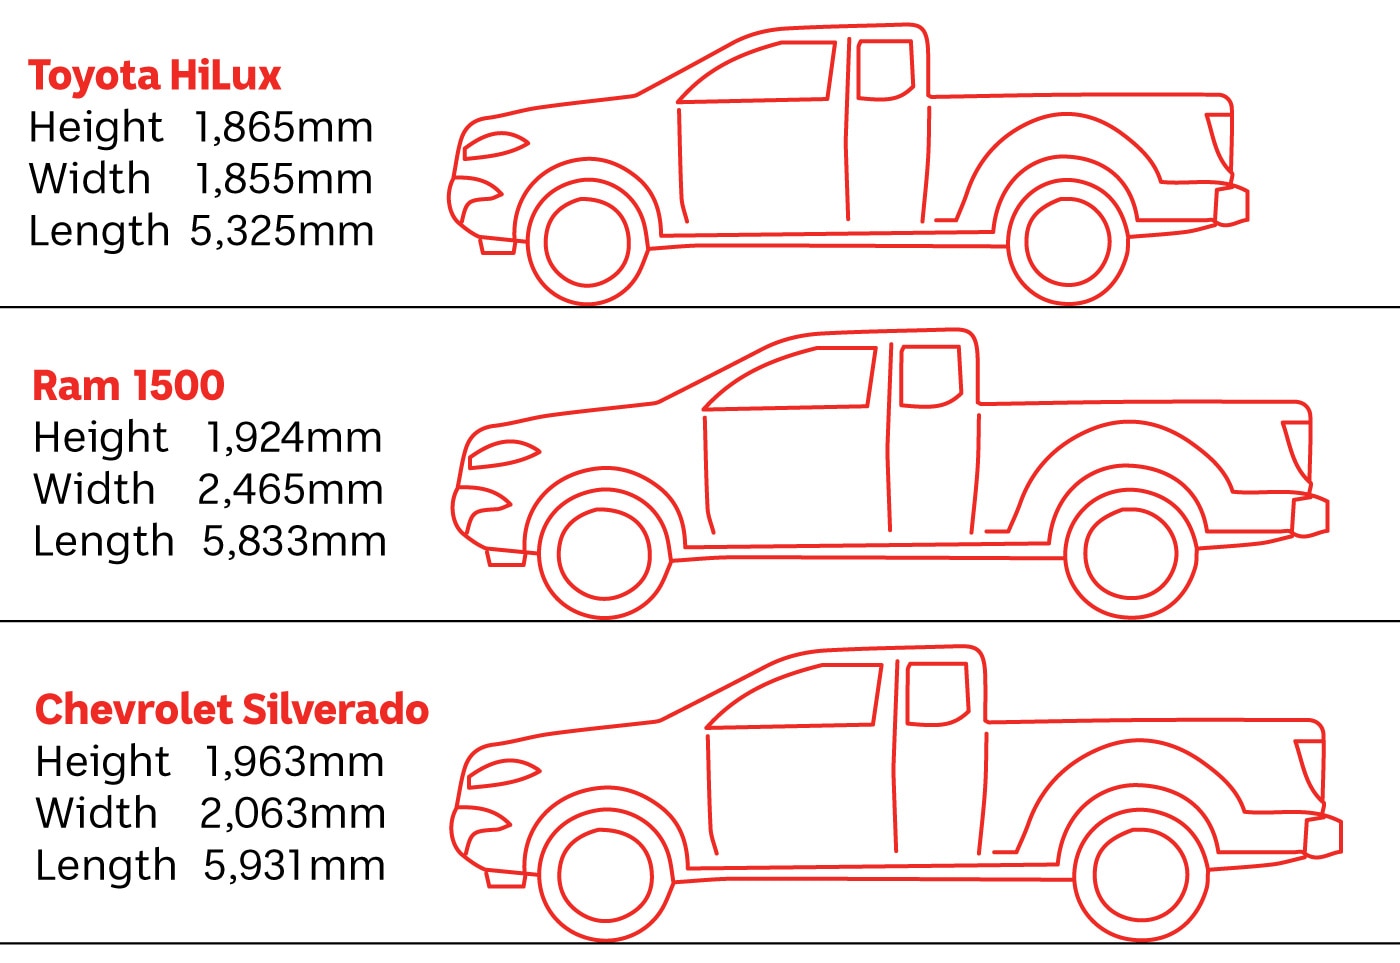 A graphic showing the different sizes of utes and American pickup trucks